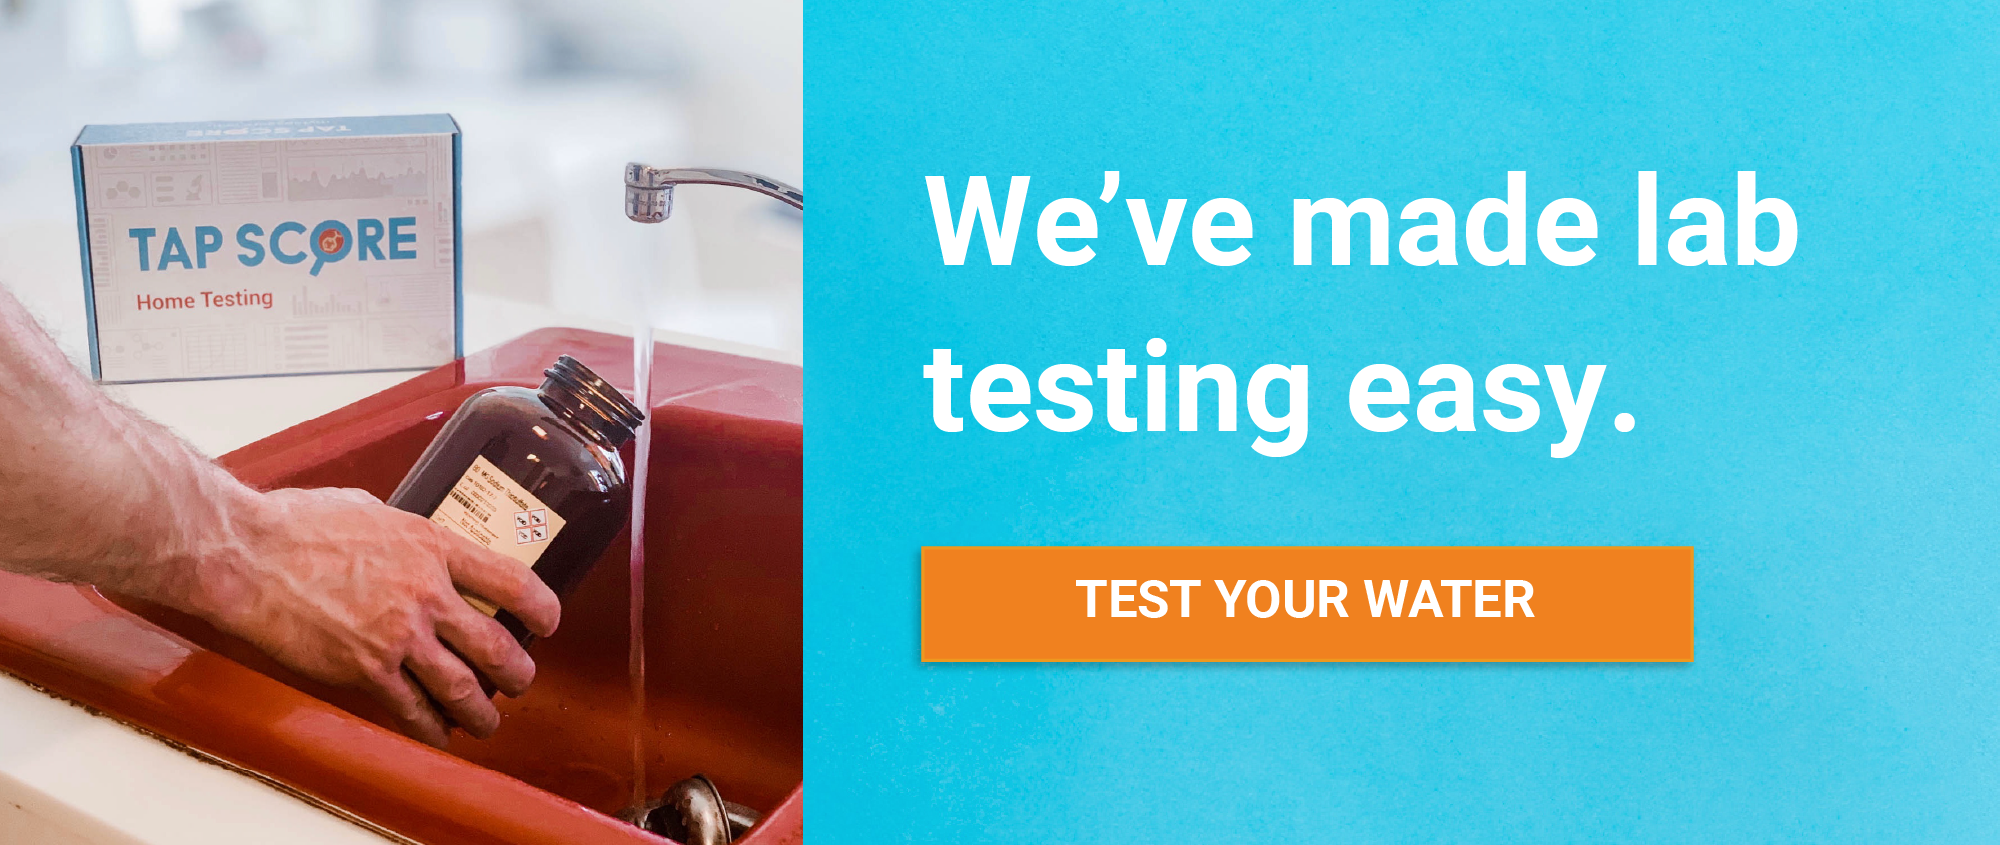 Lab testing your water made easy